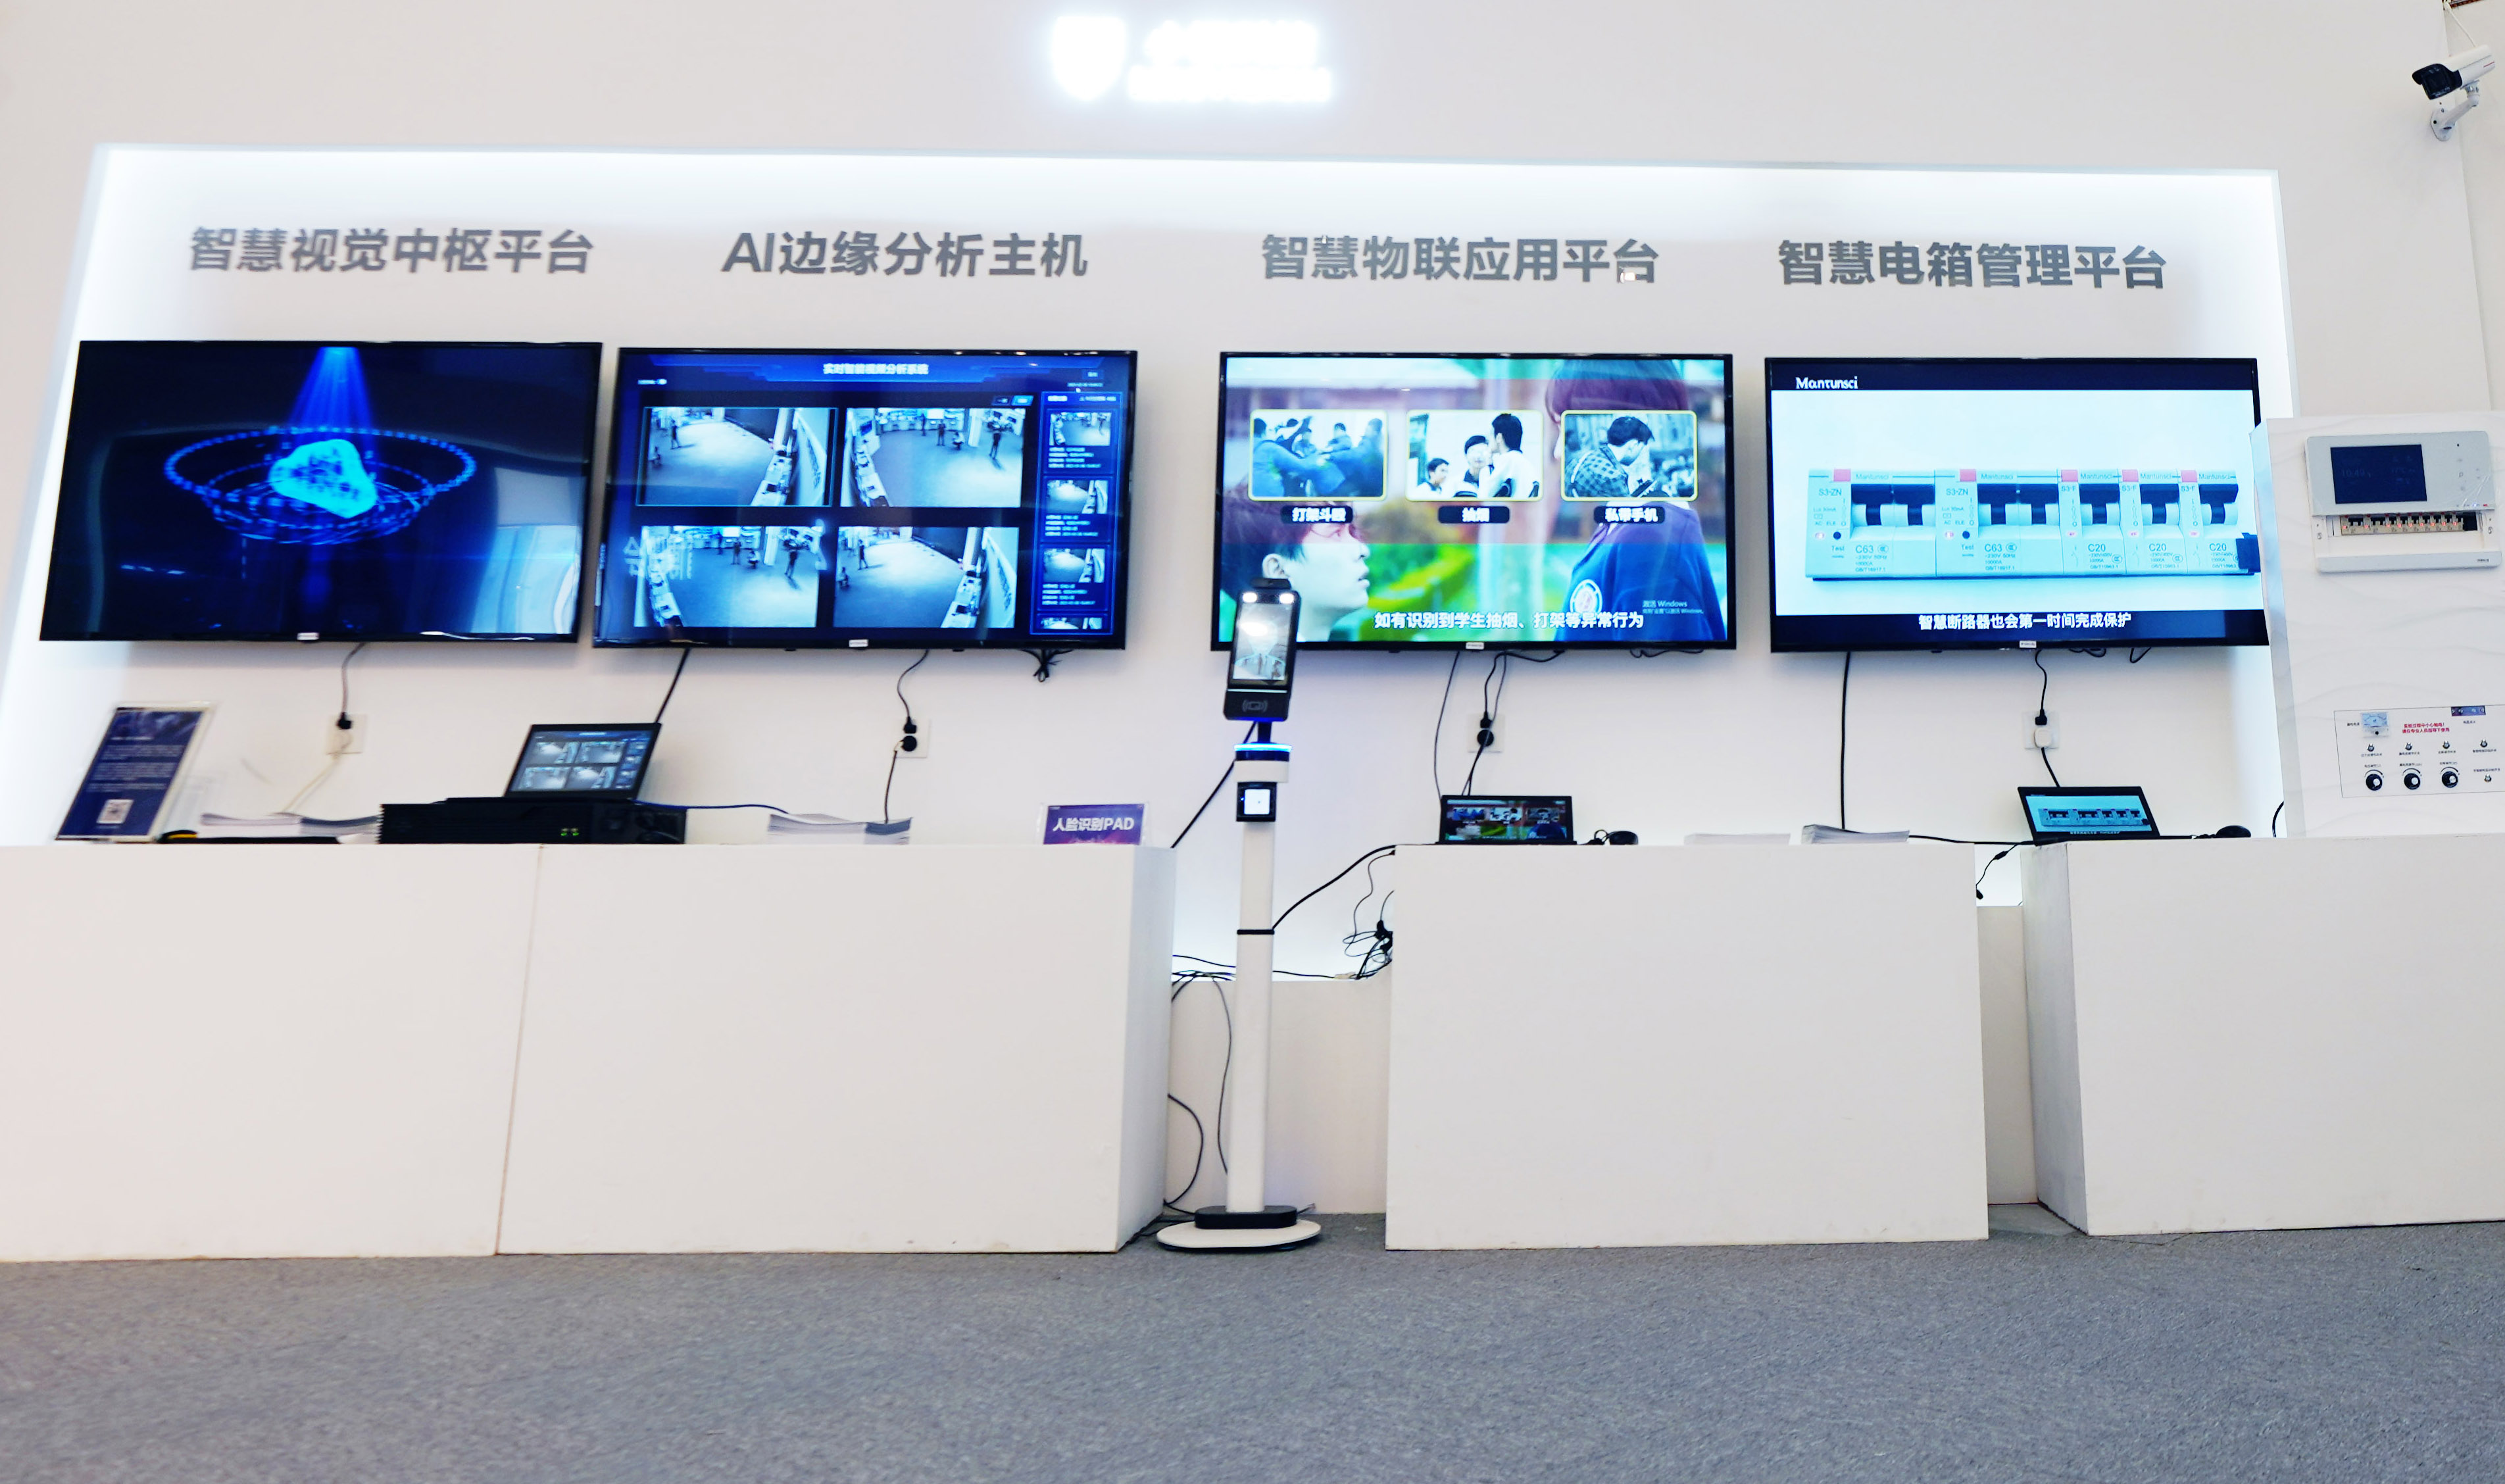 Hot going! Minivision Technology Appears at Suzhou Telecom 2023 Digital Education Expo with Multiple Products